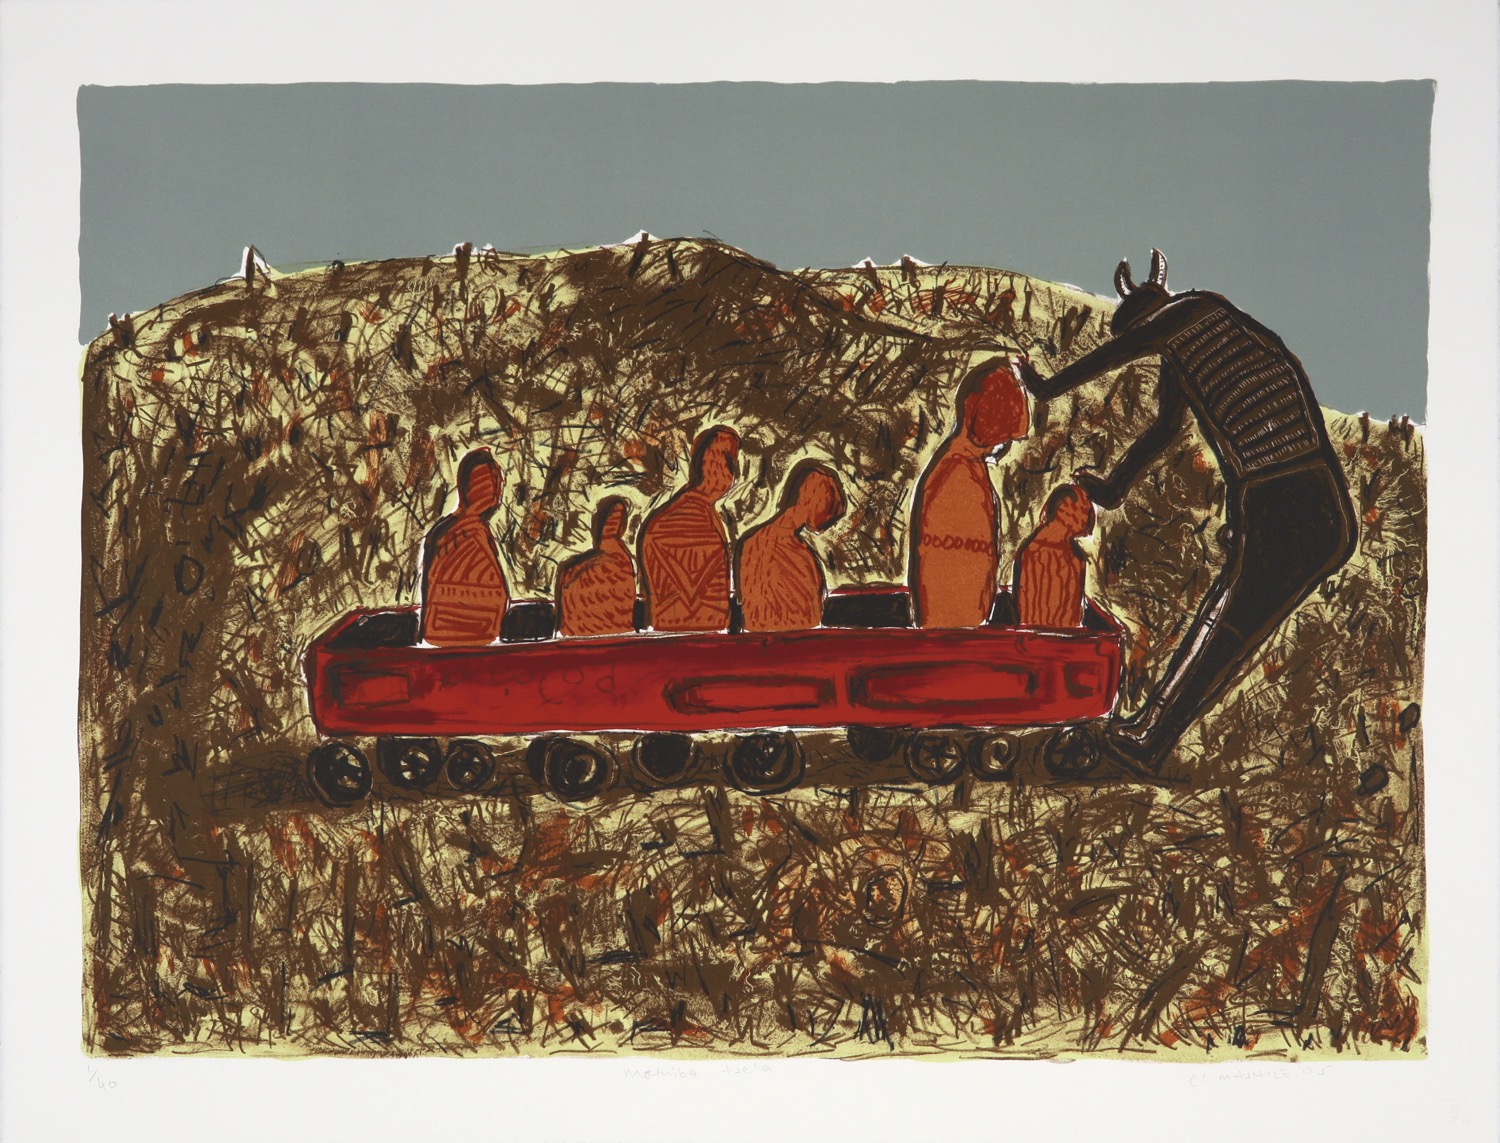 Six figures seated in a rectangular wheeled box being stopped by horned figure facing them.